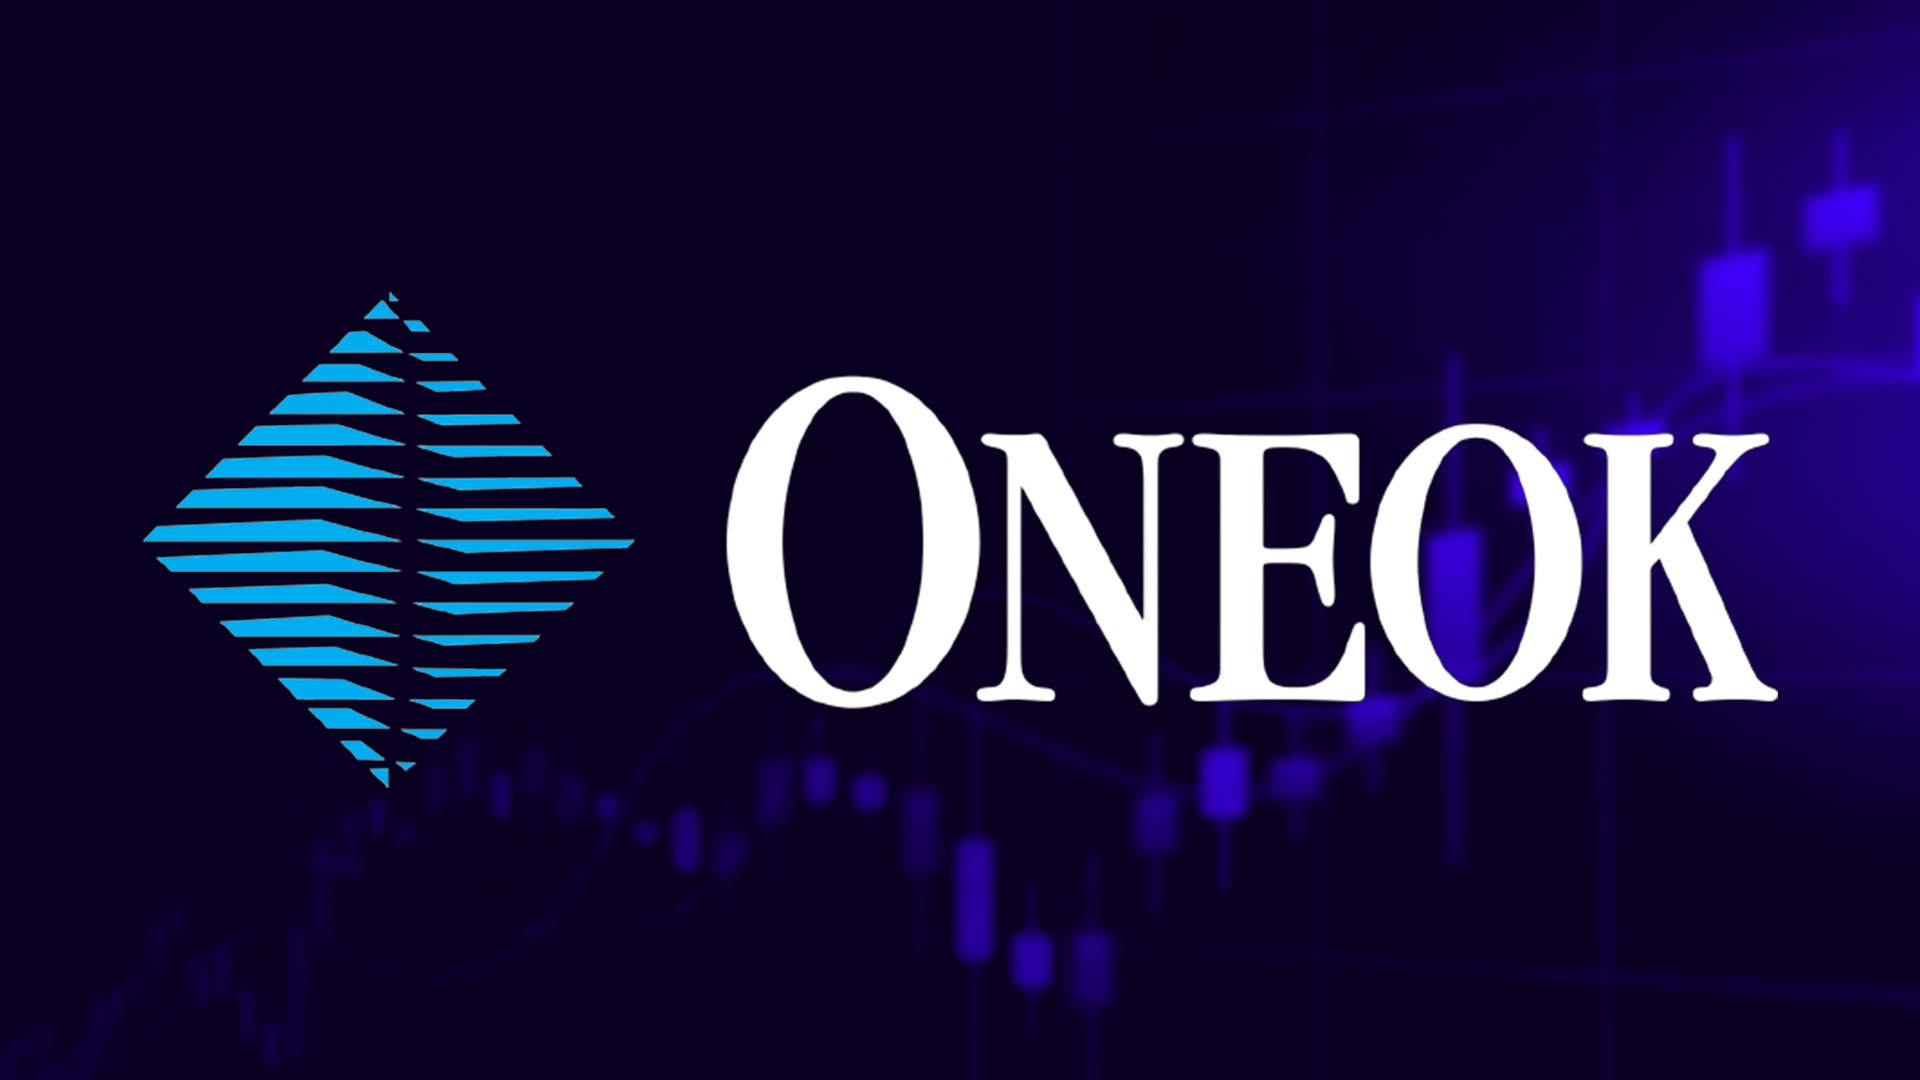 Oneok (OKE) Stock Forecast and Price Target